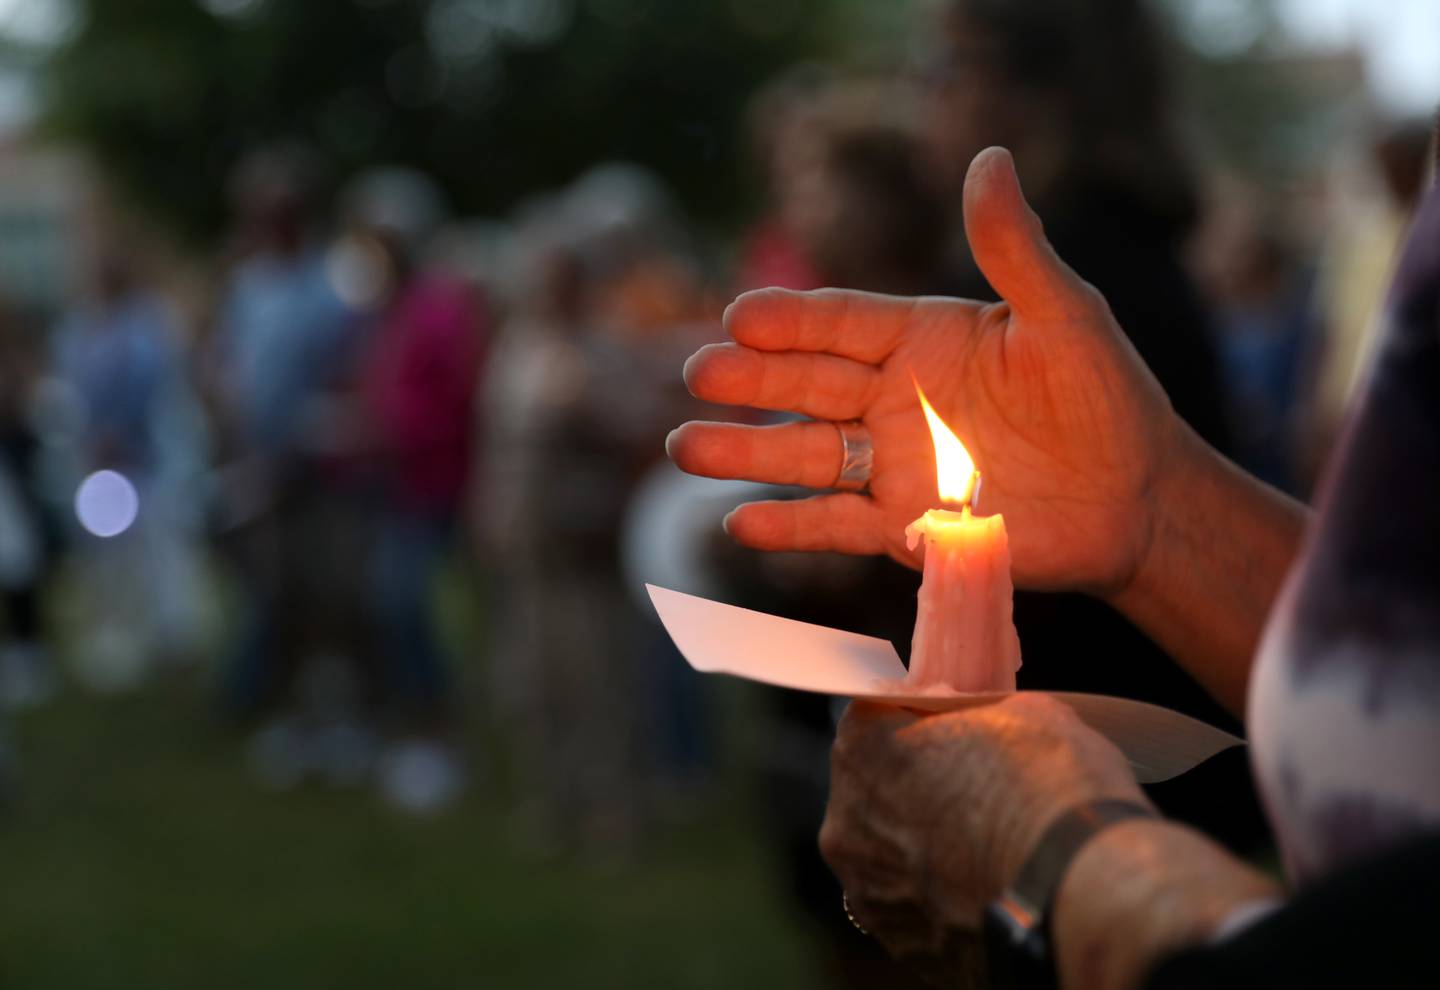 A candlelight vigil was held Wednesday, July 6, 2022, at the Kane County Courthouse in Geneva. The vigil was called to join in solidarity in honor of the mass shooting at a Fourth of July parade in Highland Park.